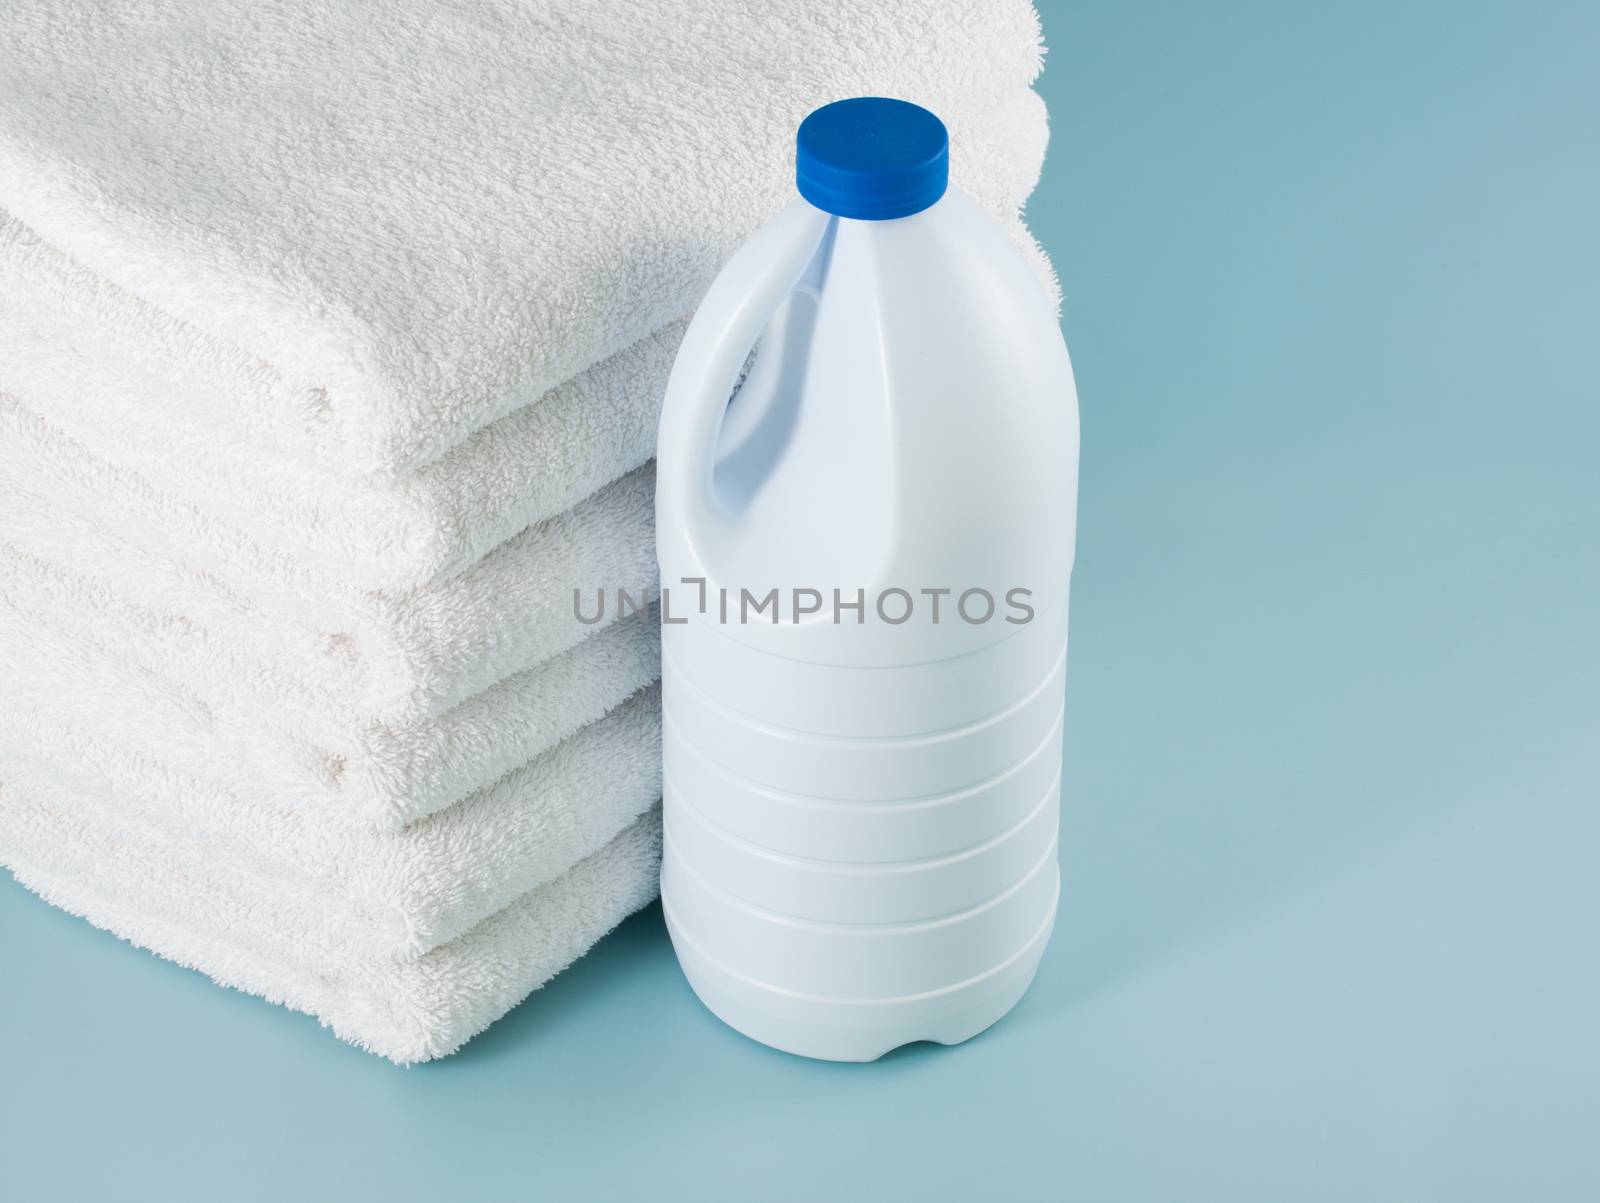 laundry launderer bleach bottles and terry towel by lanalanglois